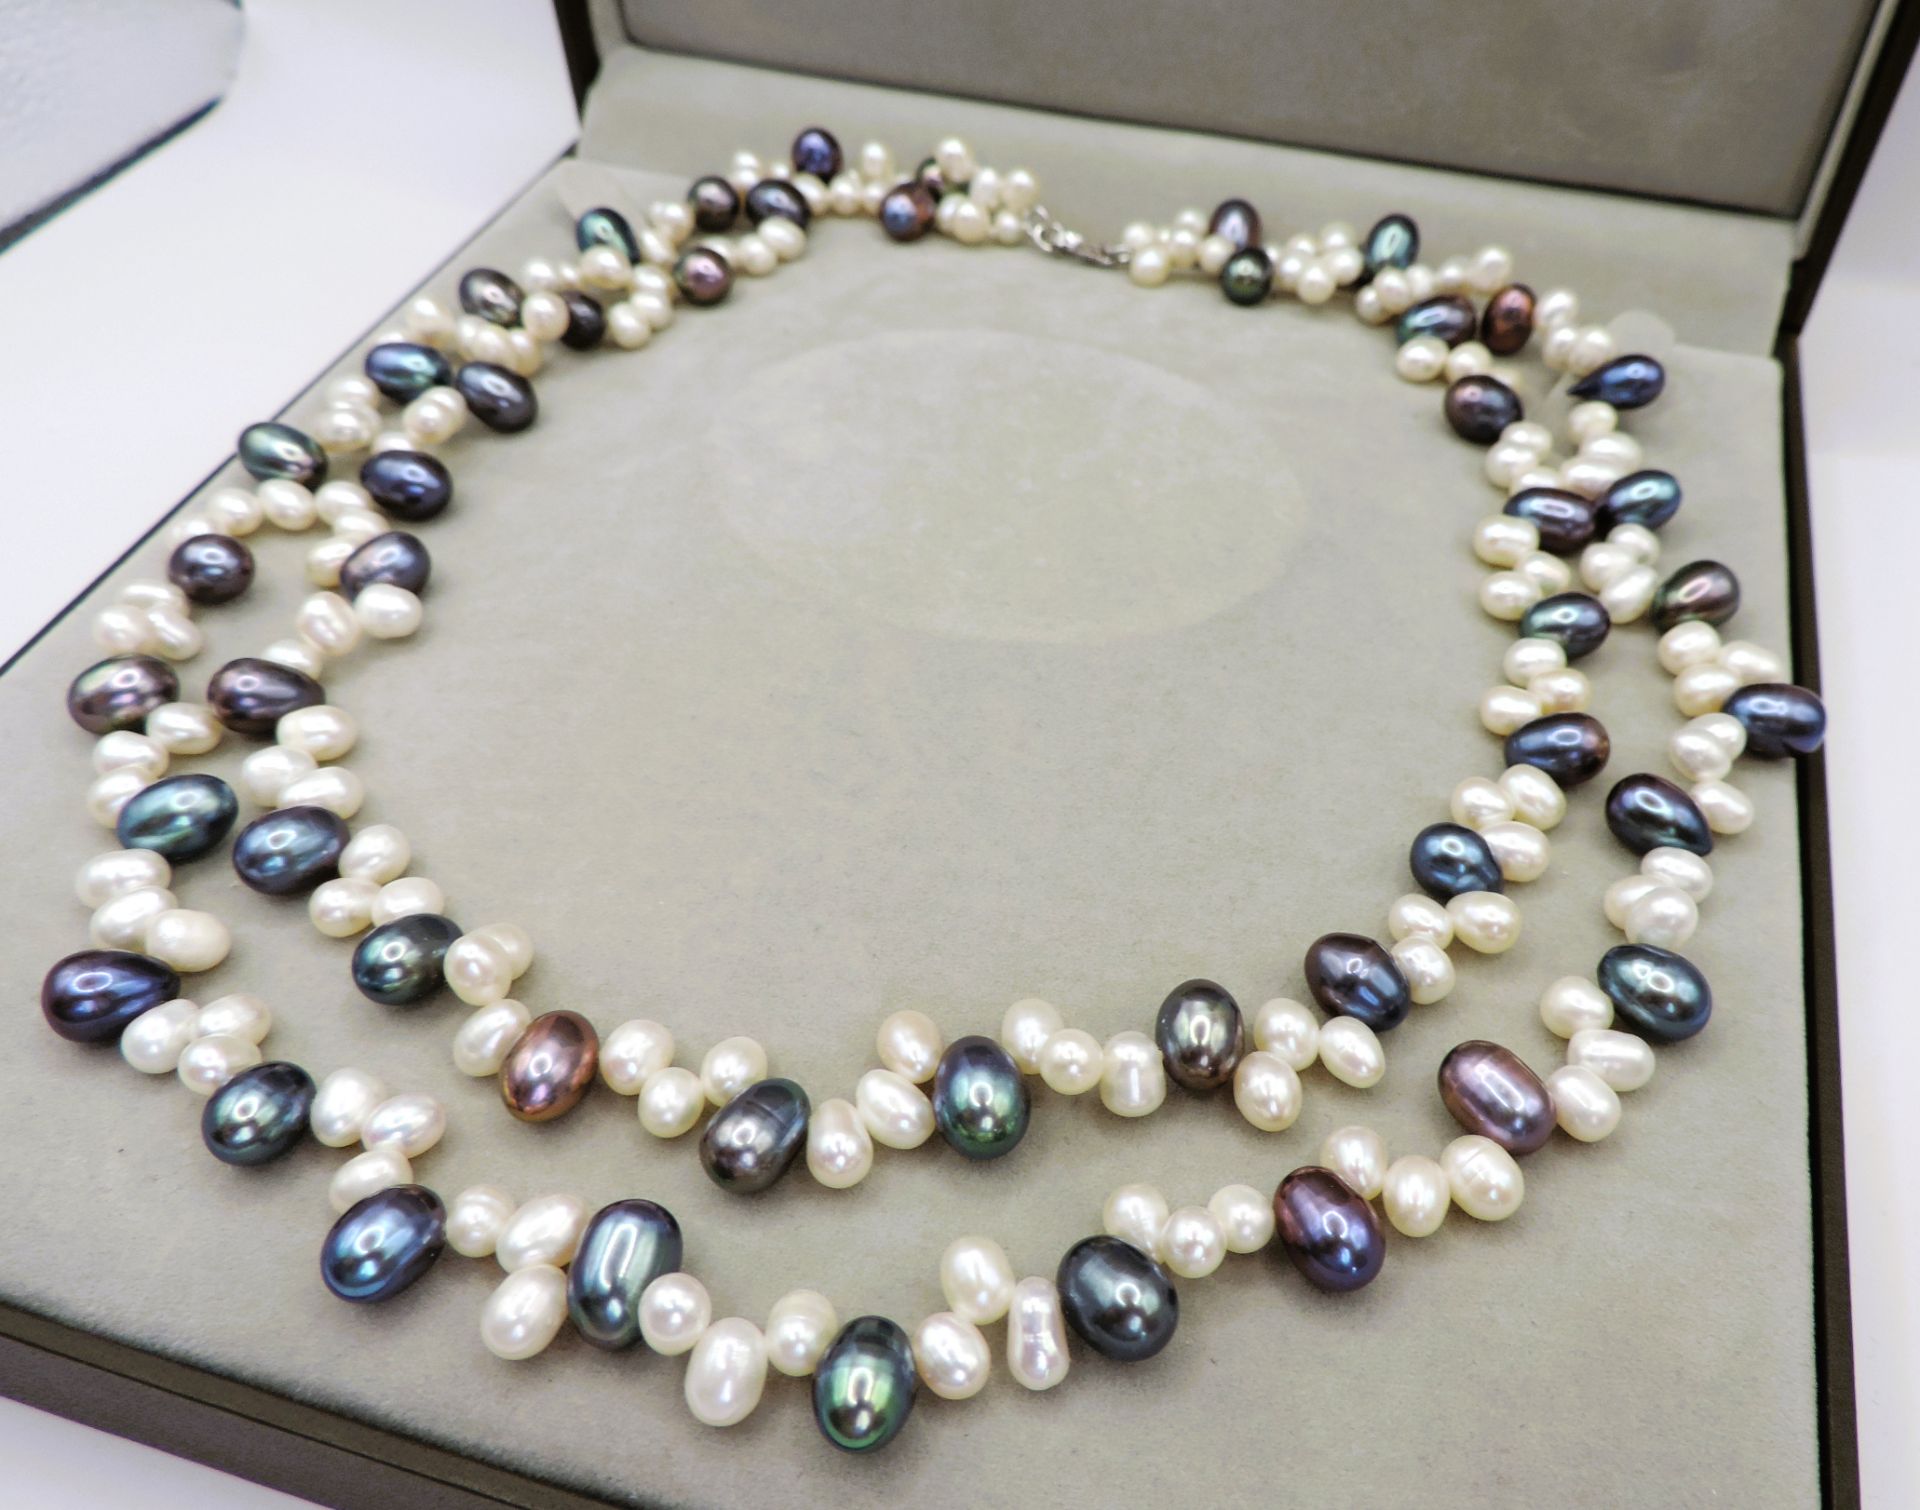 Cultured Pearl Necklace Silver Clasp New with Gift Box - Image 2 of 4